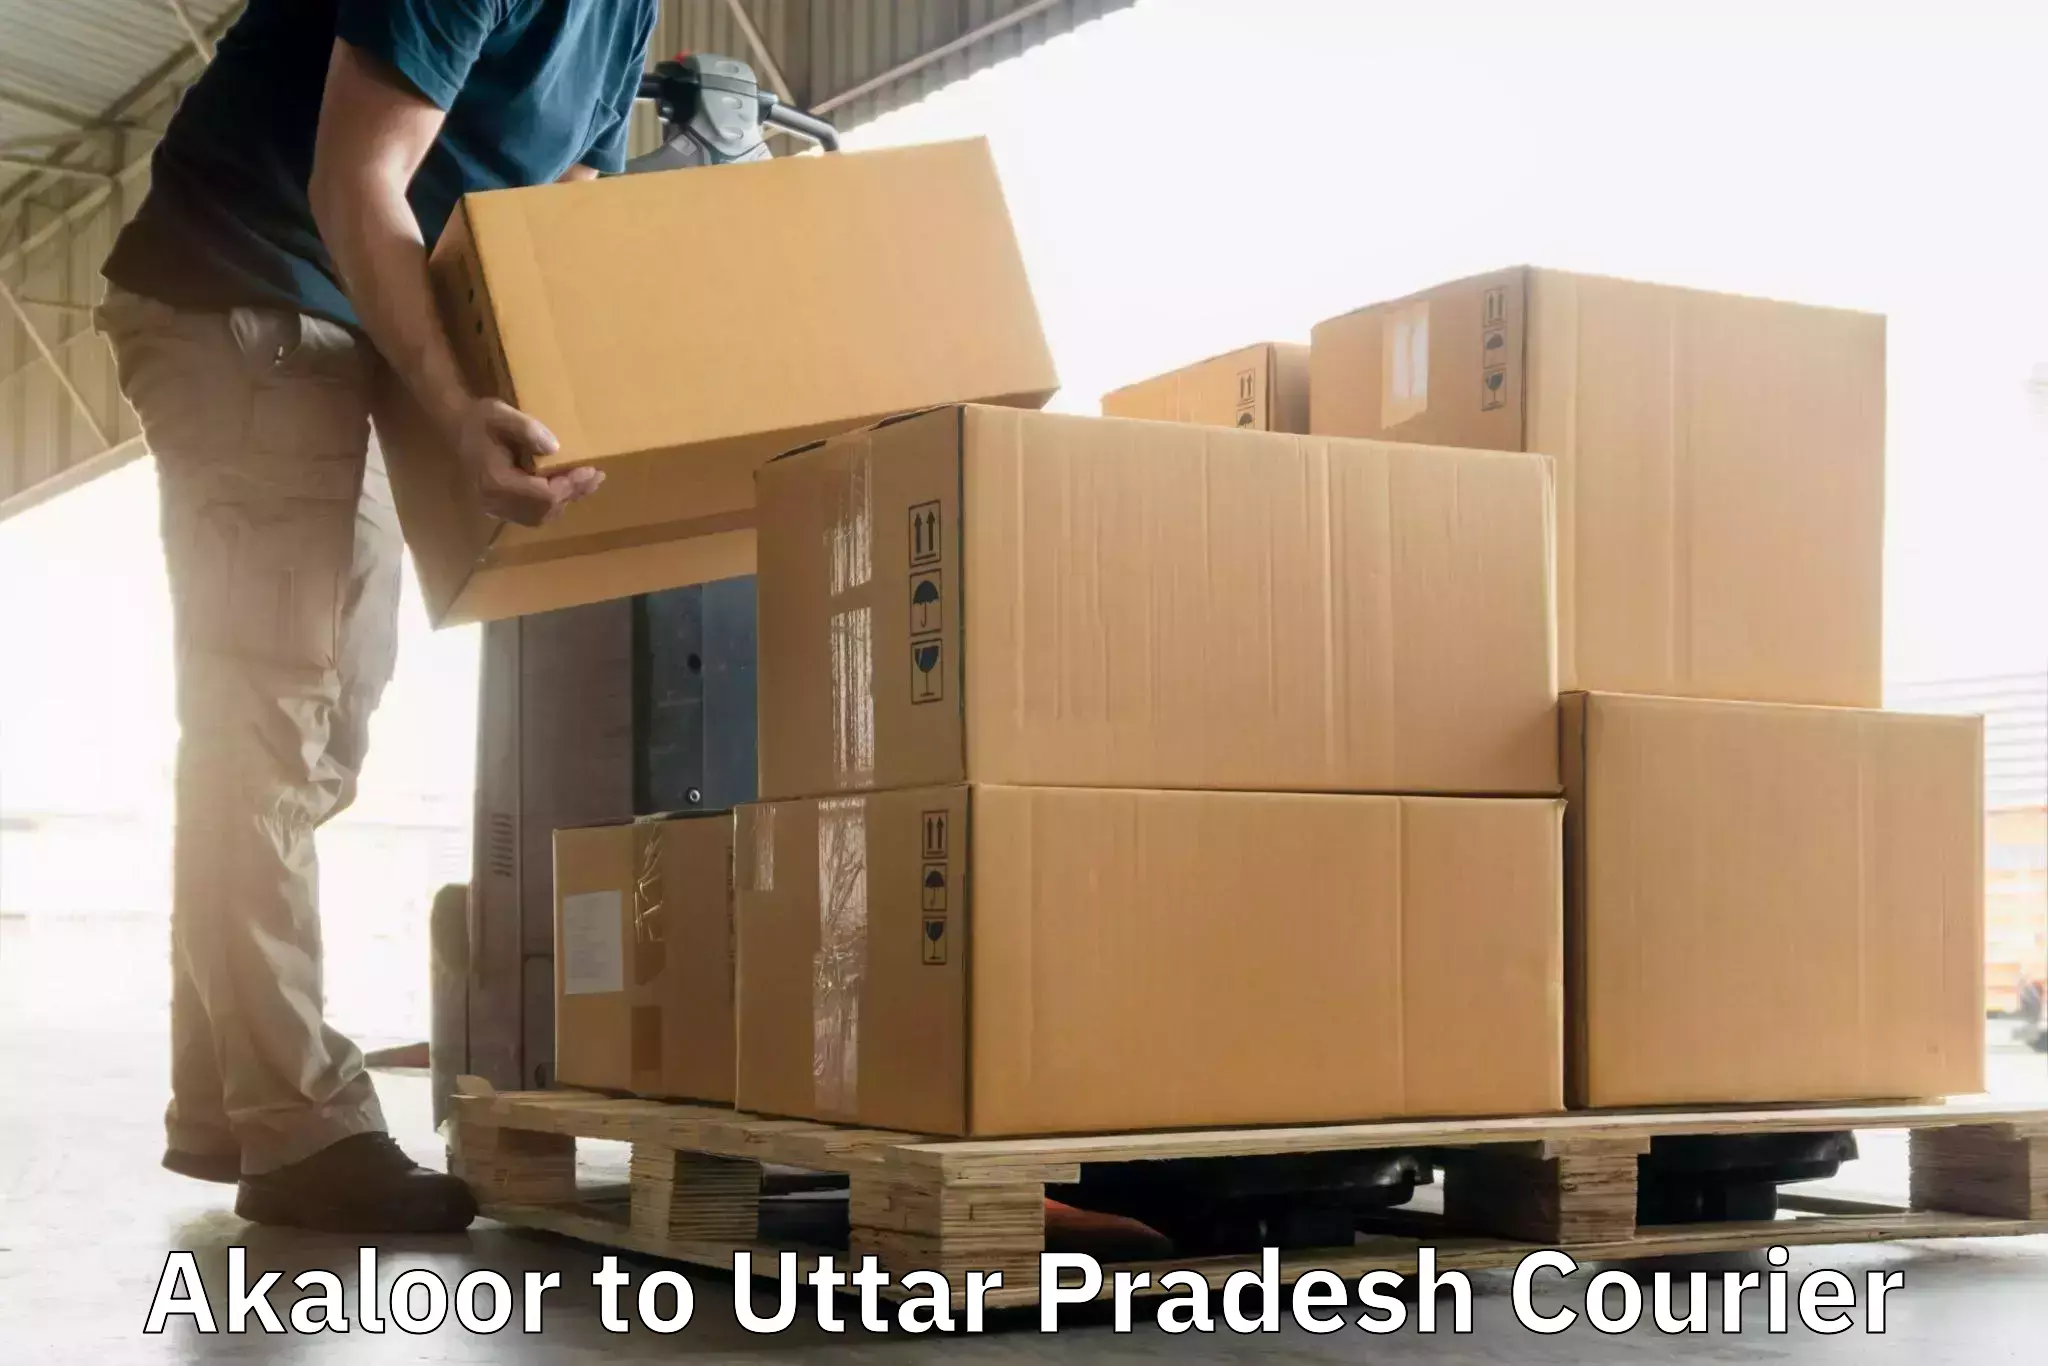 Courier service partnerships Akaloor to Agra